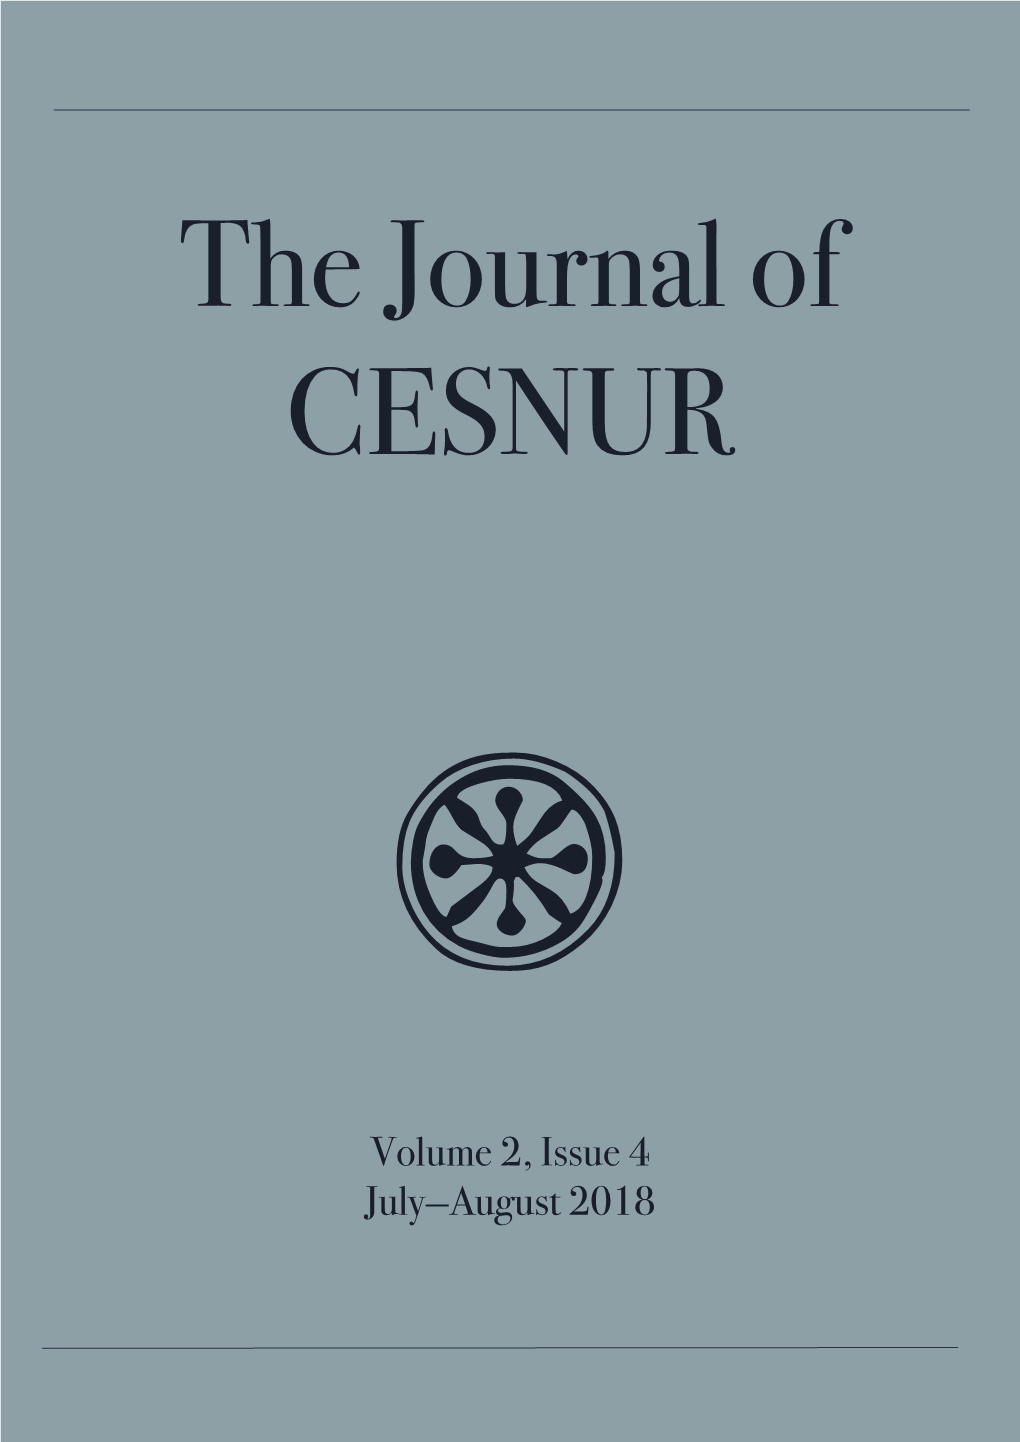 Volume 2, Issue 4 July—August 2018